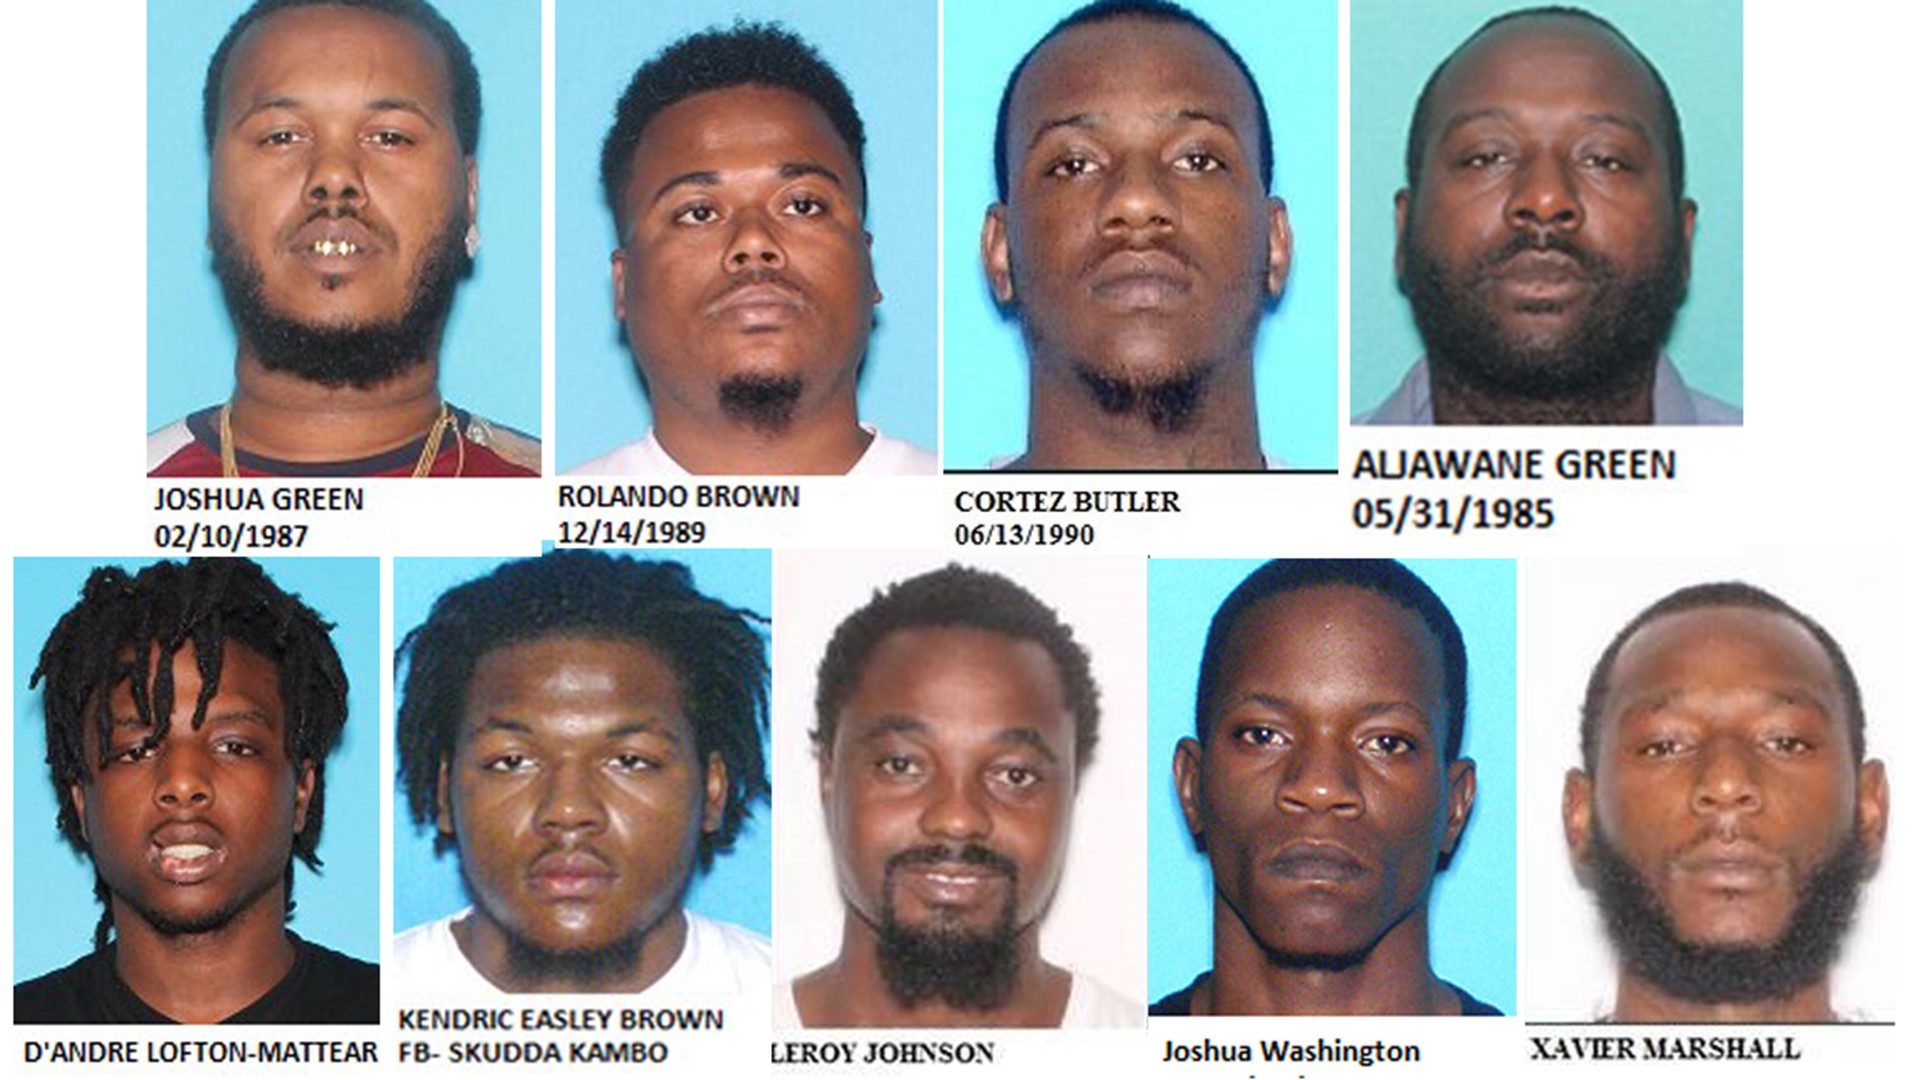 Tampa police announce arrests of 9 'violent' street gang members